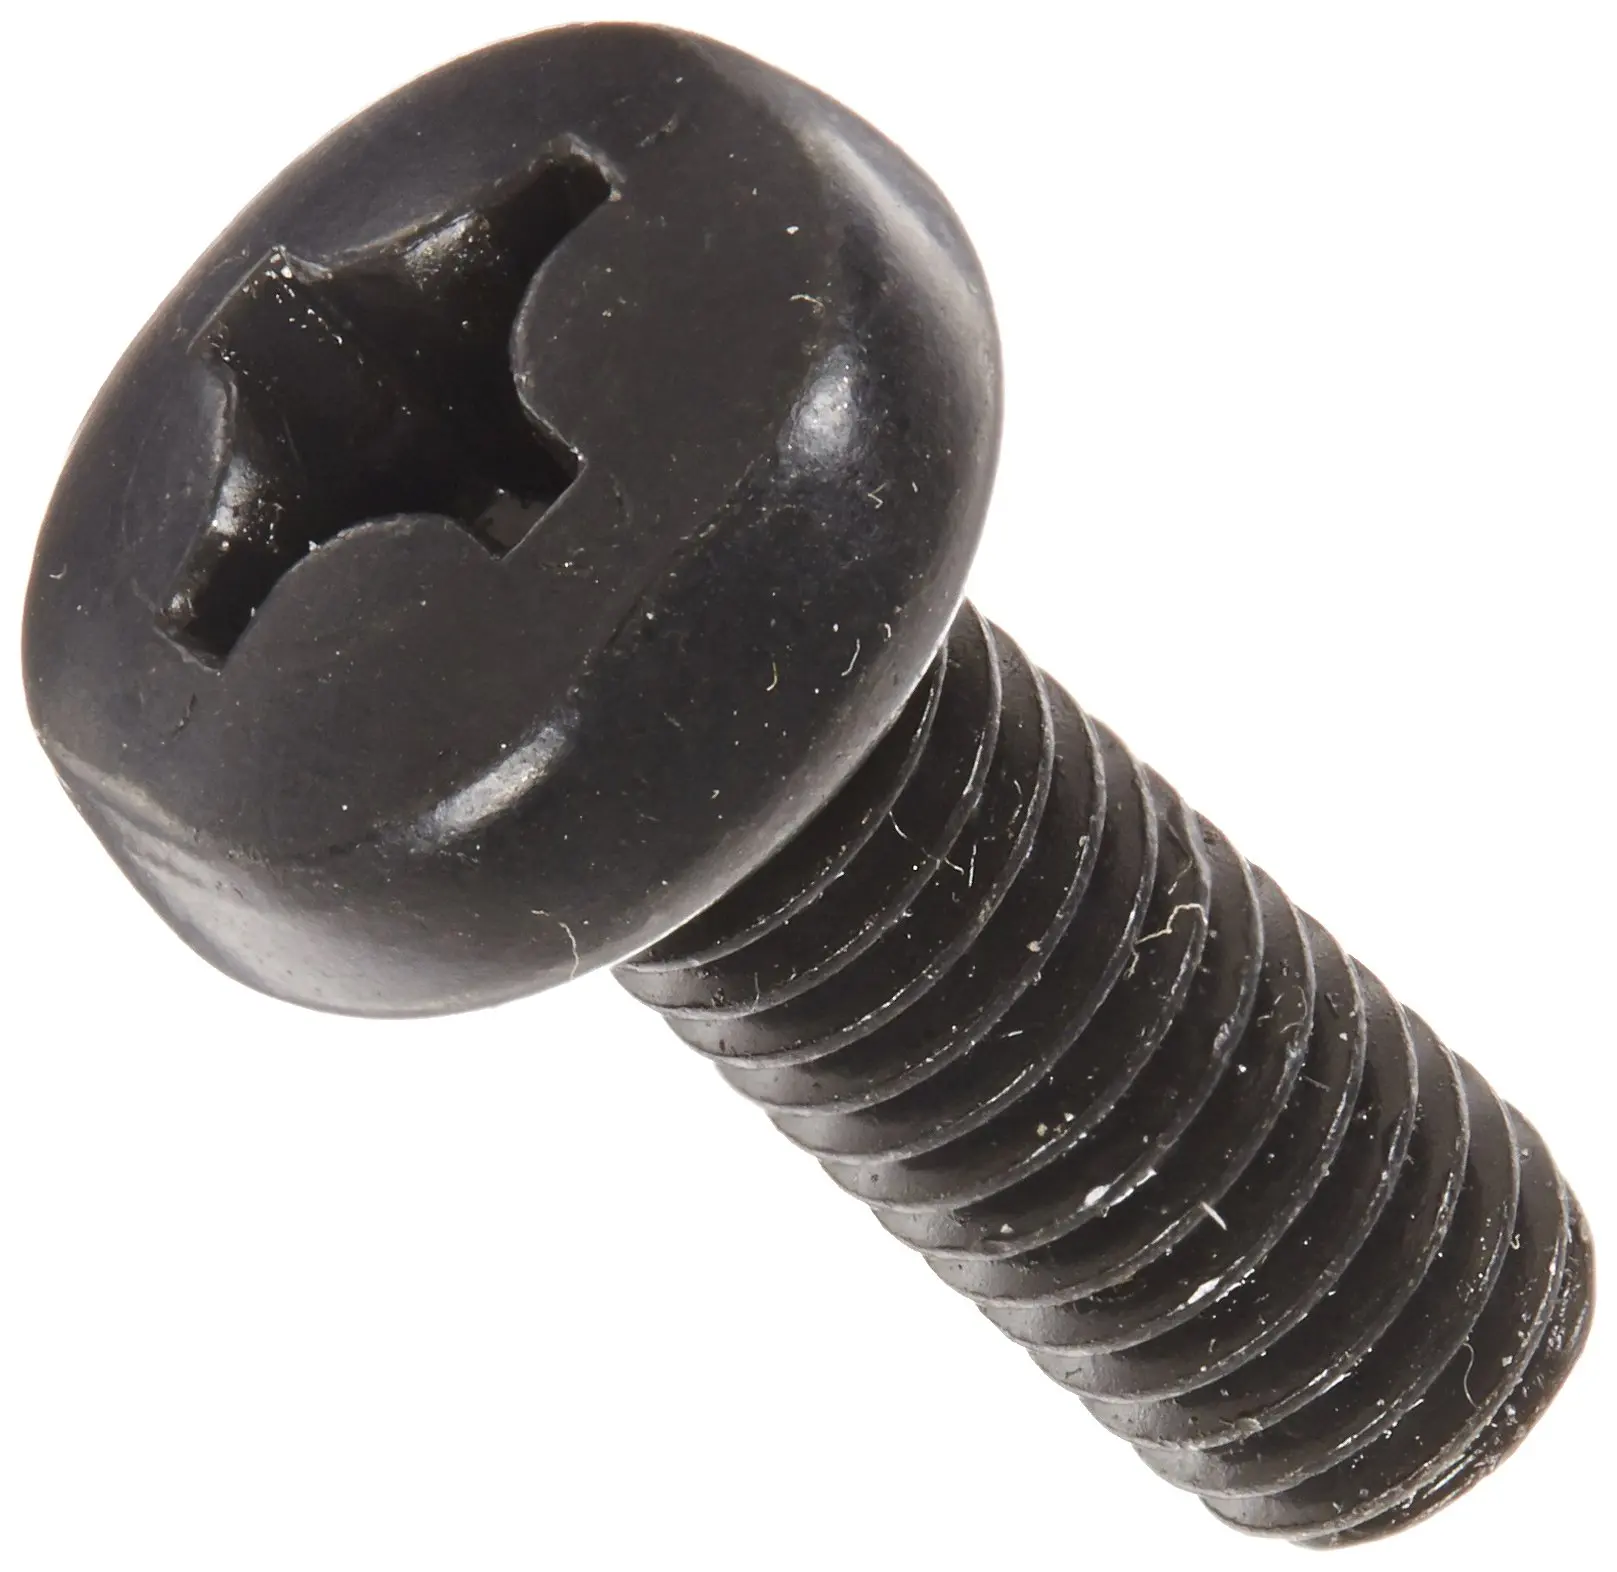 3-1//2 Length #2 Phillips Drive Fully Threaded Black Oxide Finish Meets ASME B18.6.3 3-1//2 Length Small Parts FSC08312PPSB #8-32 Thread Size Import Pack of 25 Steel Pan Head Machine Screw